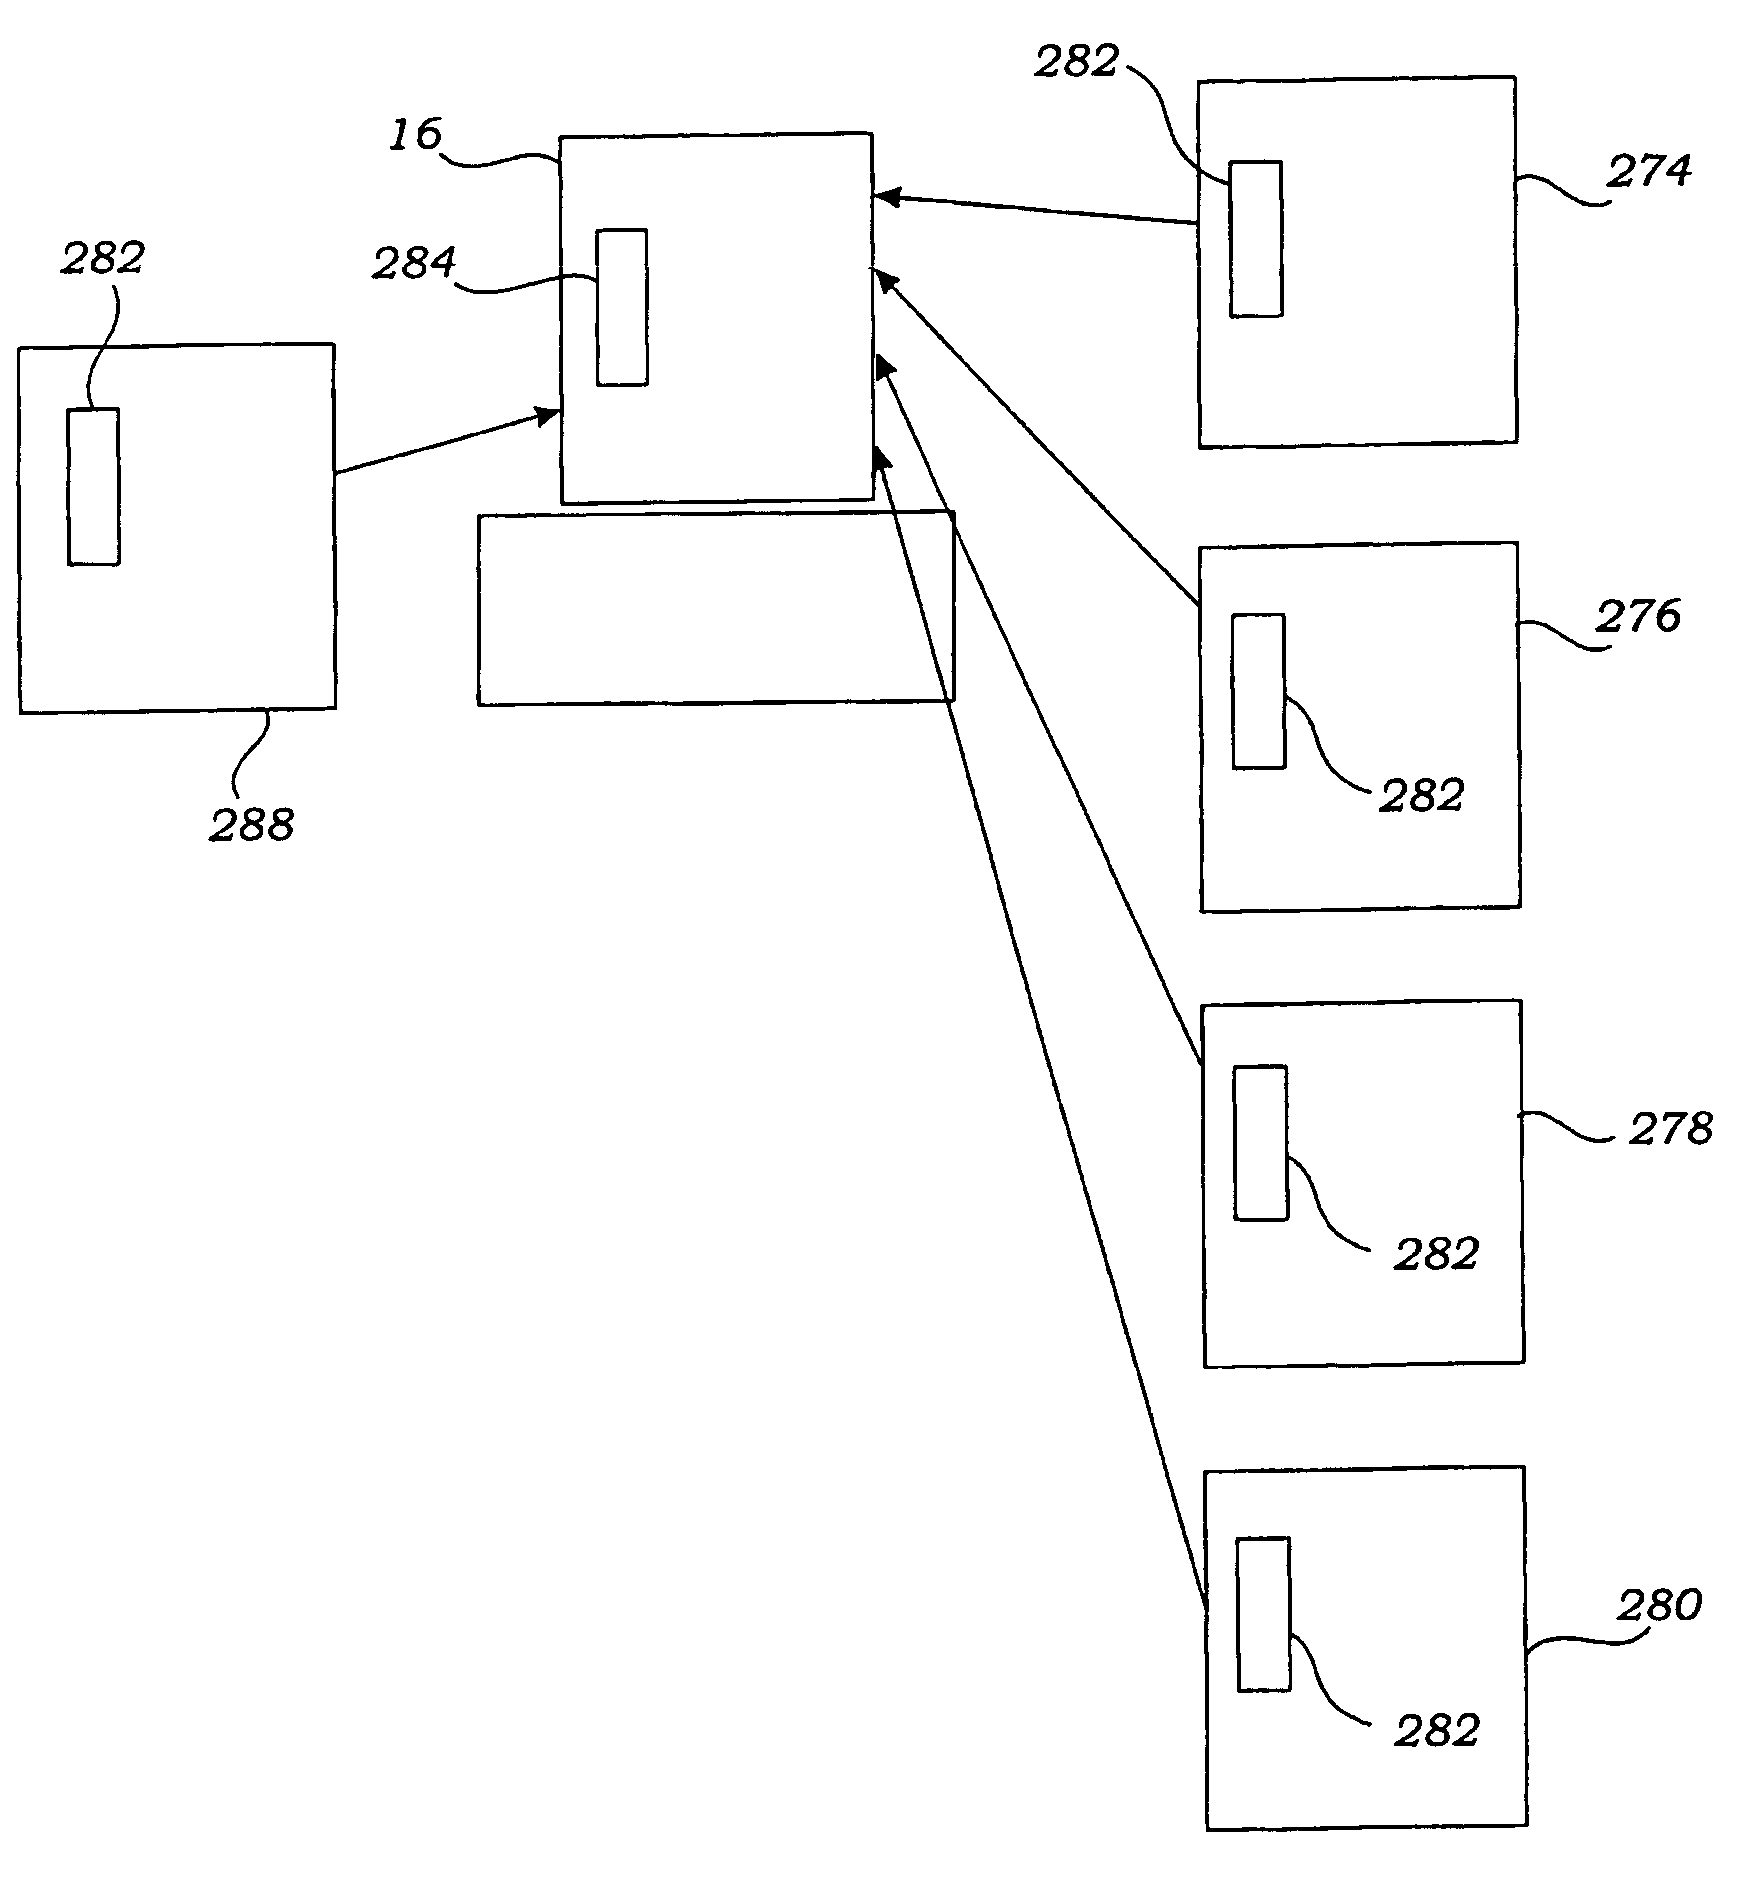 Hemofiltration systems and methods that maintain sterile extracorporeal processing conditions